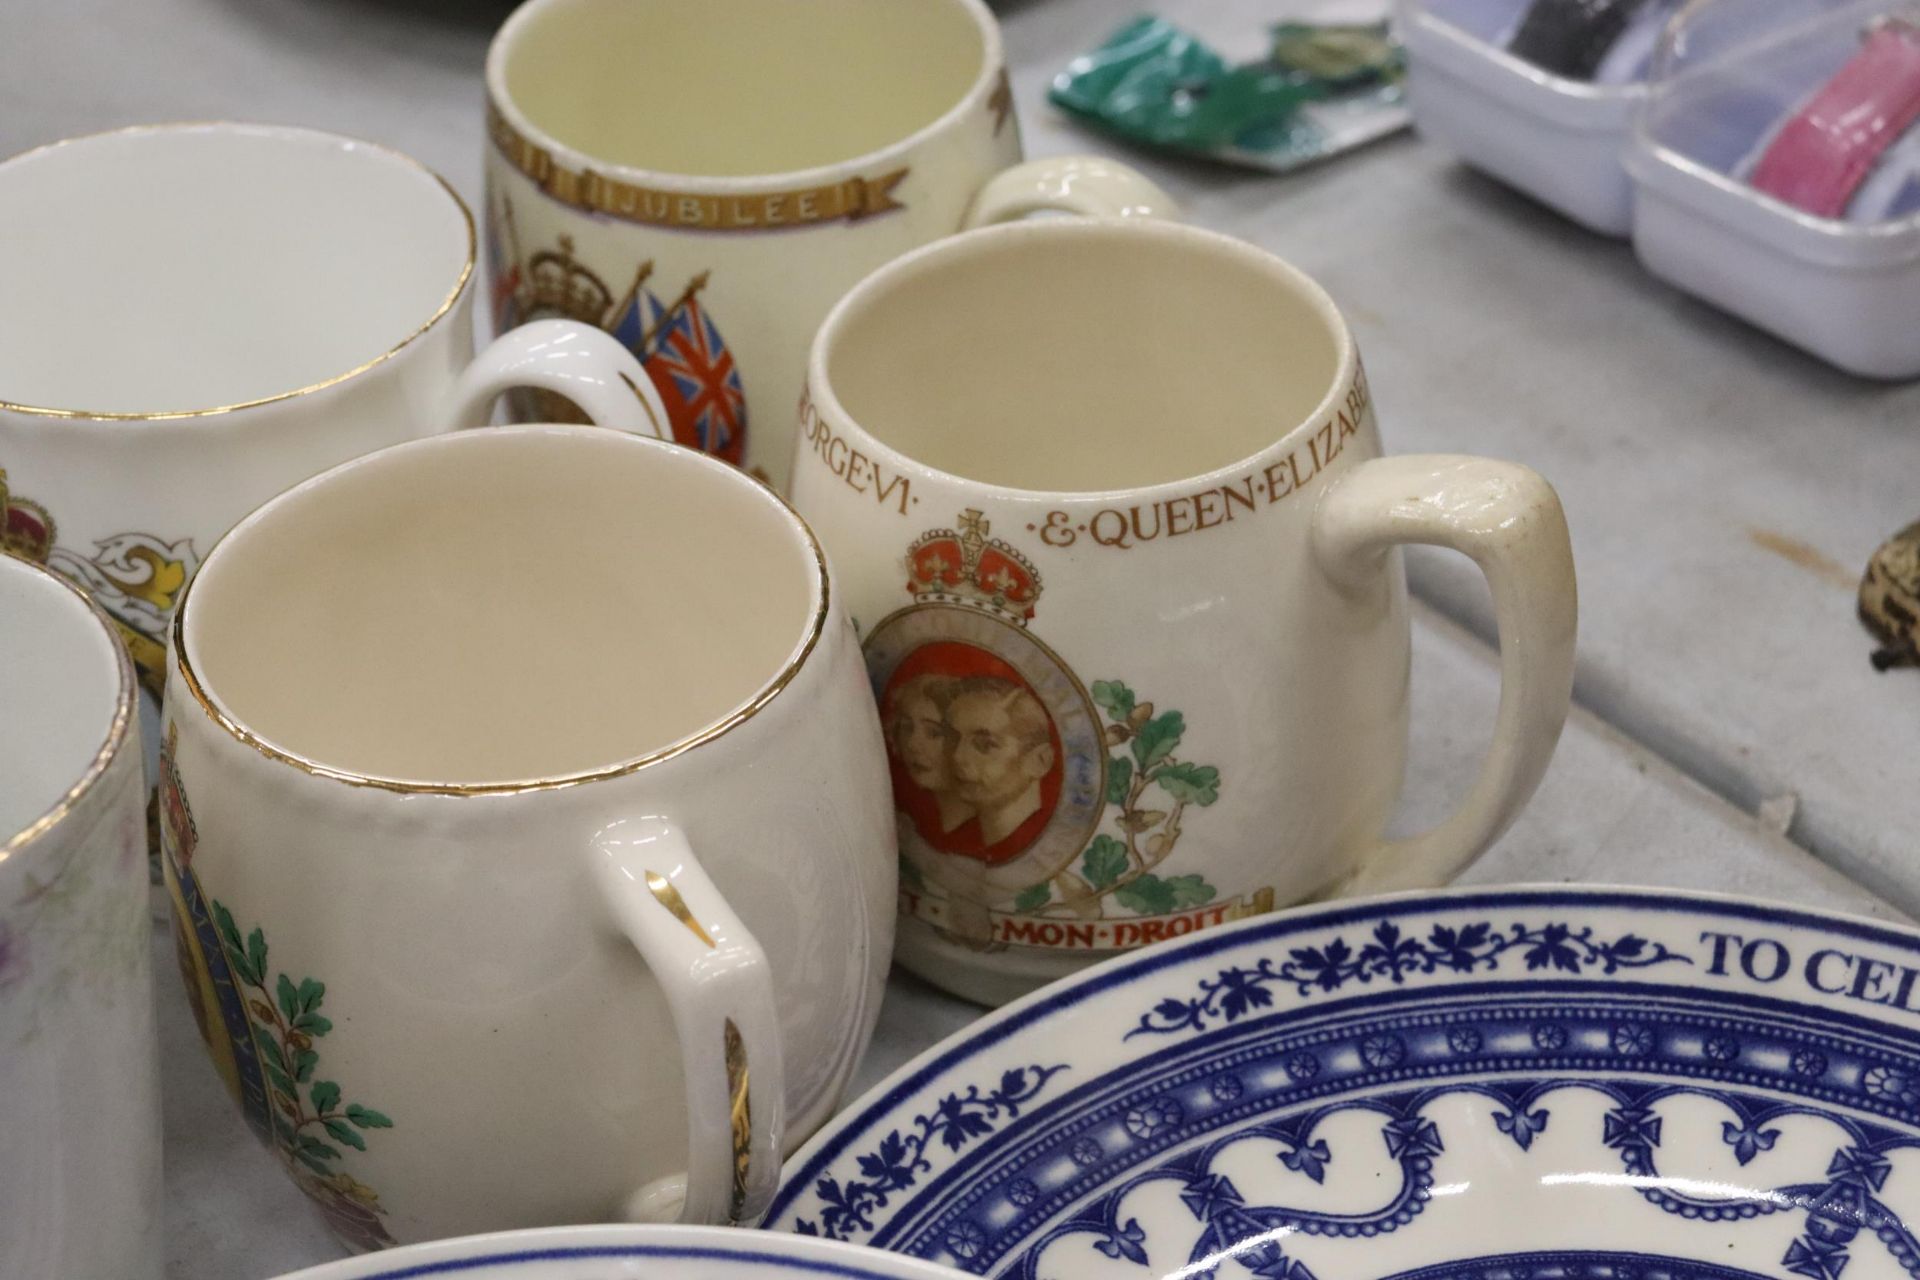 A COLLECTION OF ROYAL COMMEMORATIVE ITEMS TO INCLUDE CUPS, PLATES, PLUS GUINNESS CERAMICS - Image 9 of 11